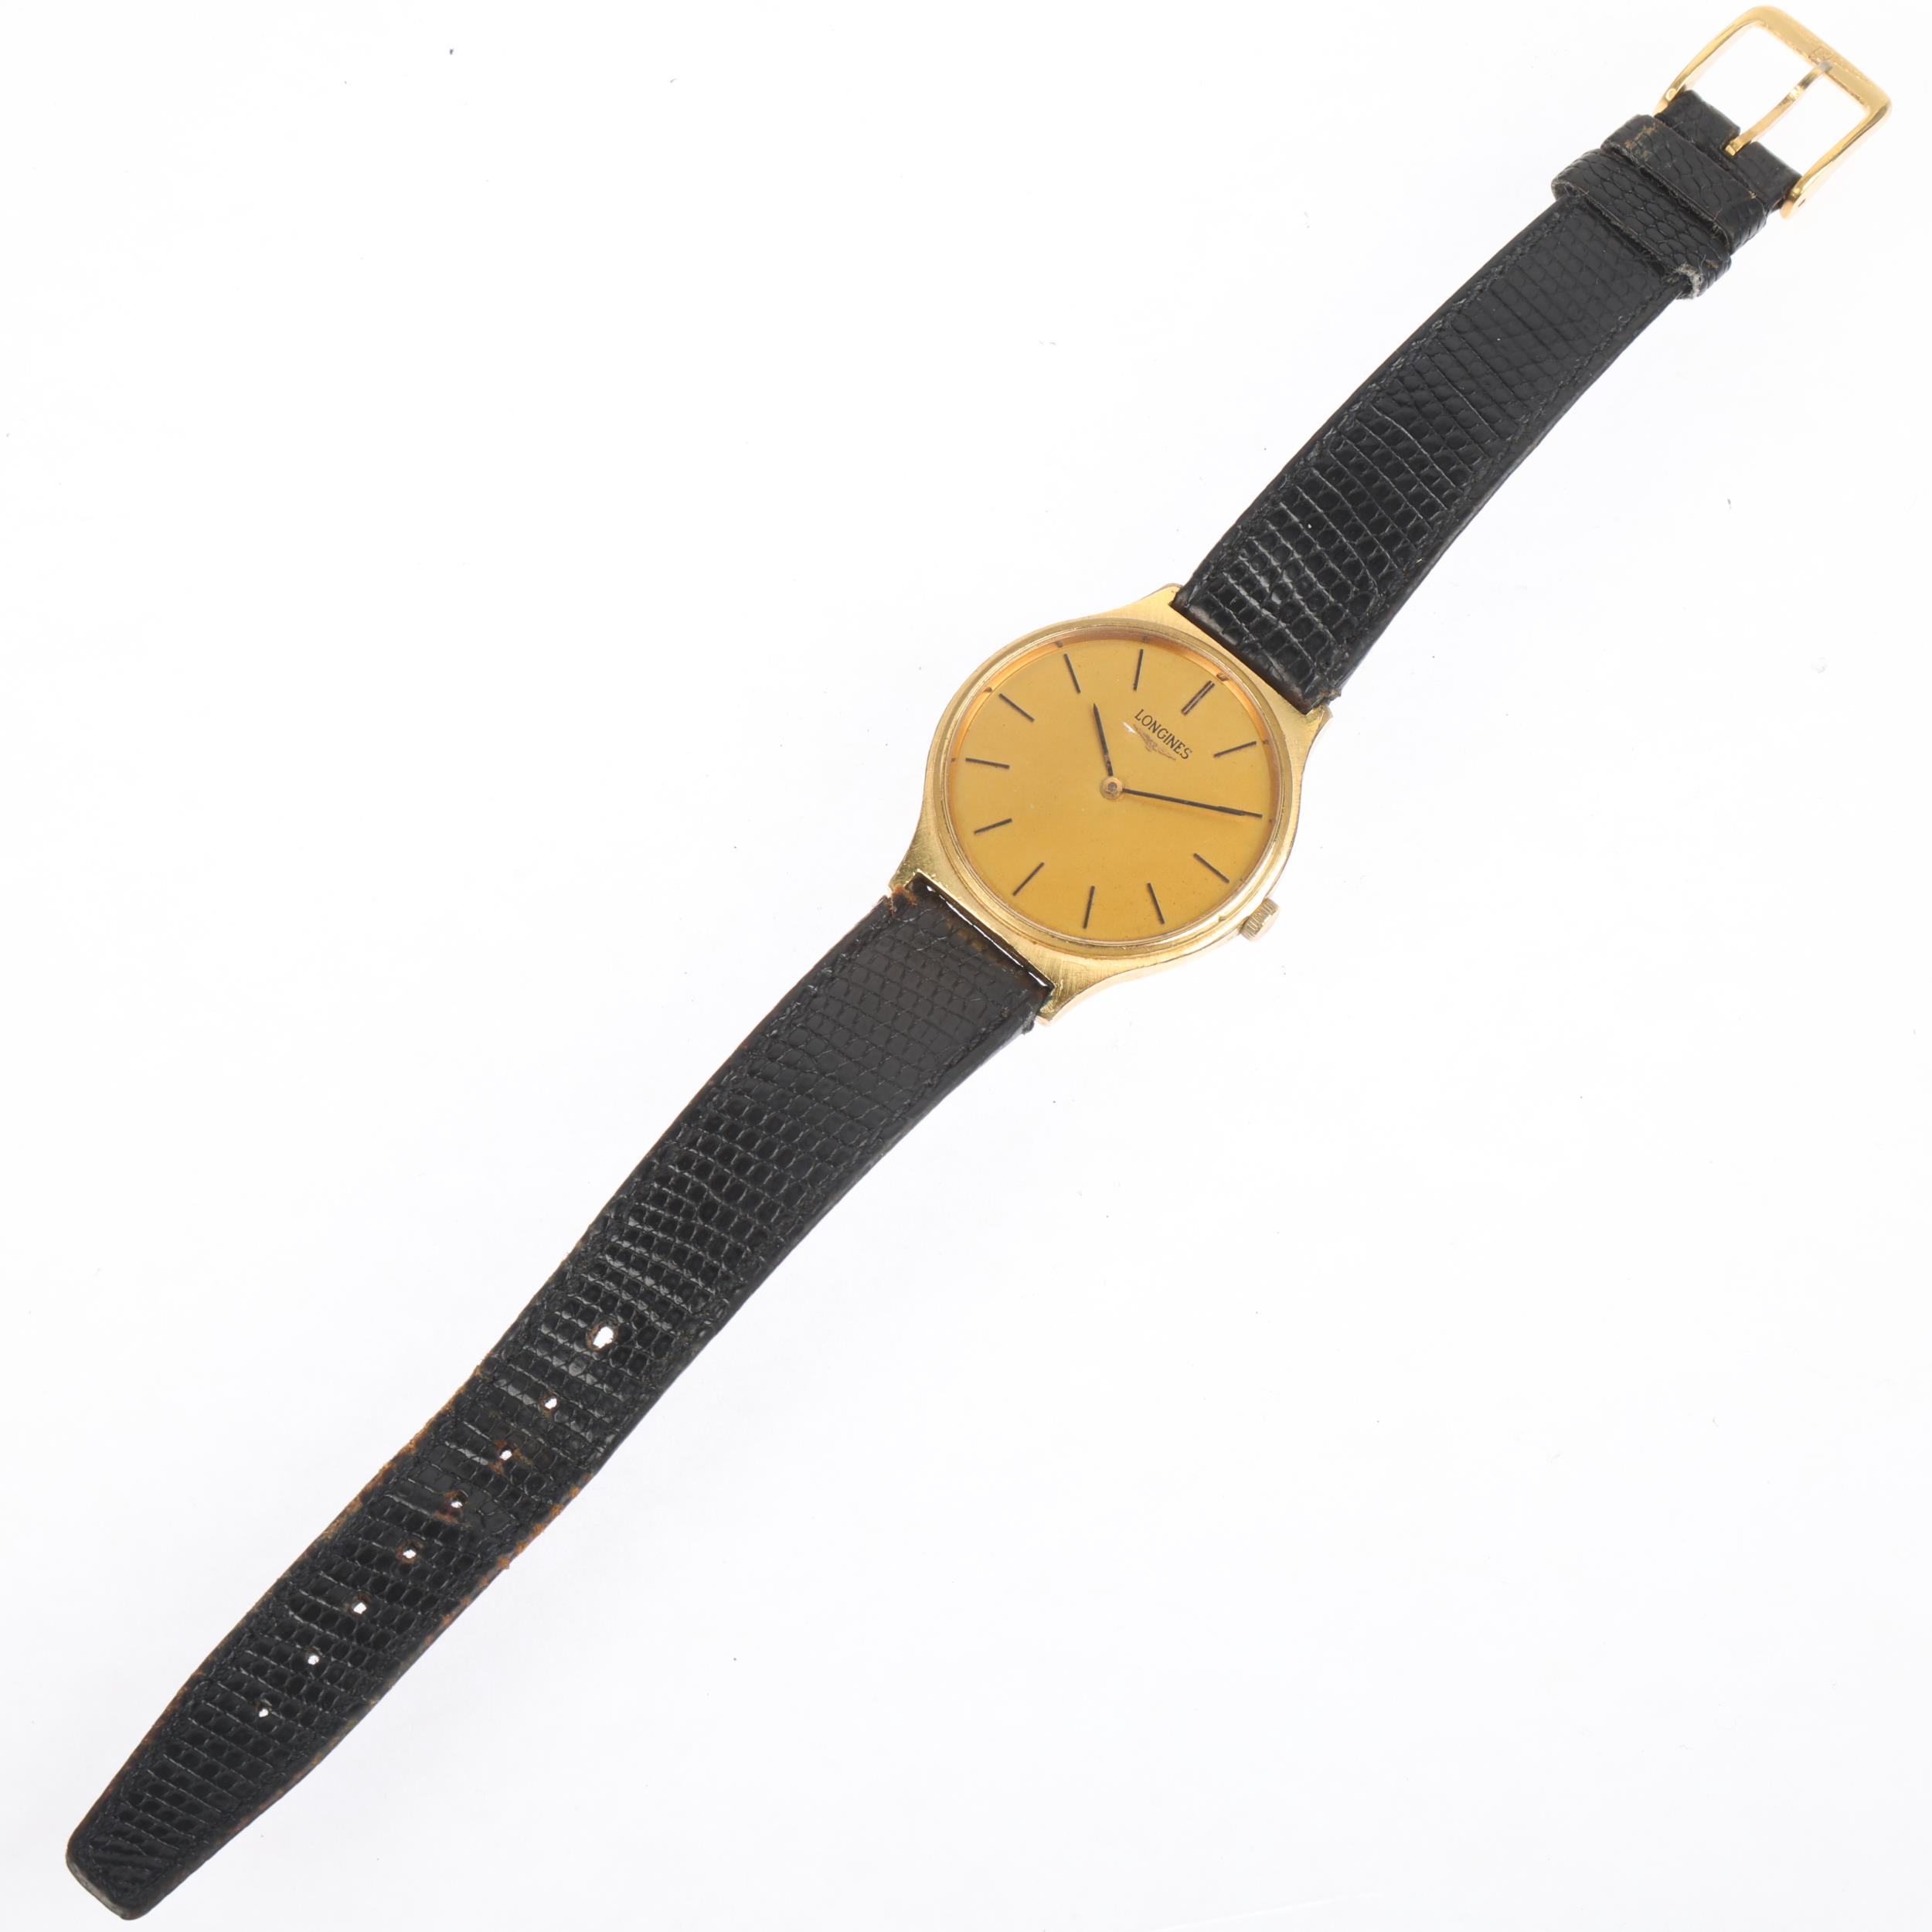 LONGINES - a gold plated stainless steel mechanical wristwatch, ref. 4427 847, circa 1970s, - Image 2 of 5